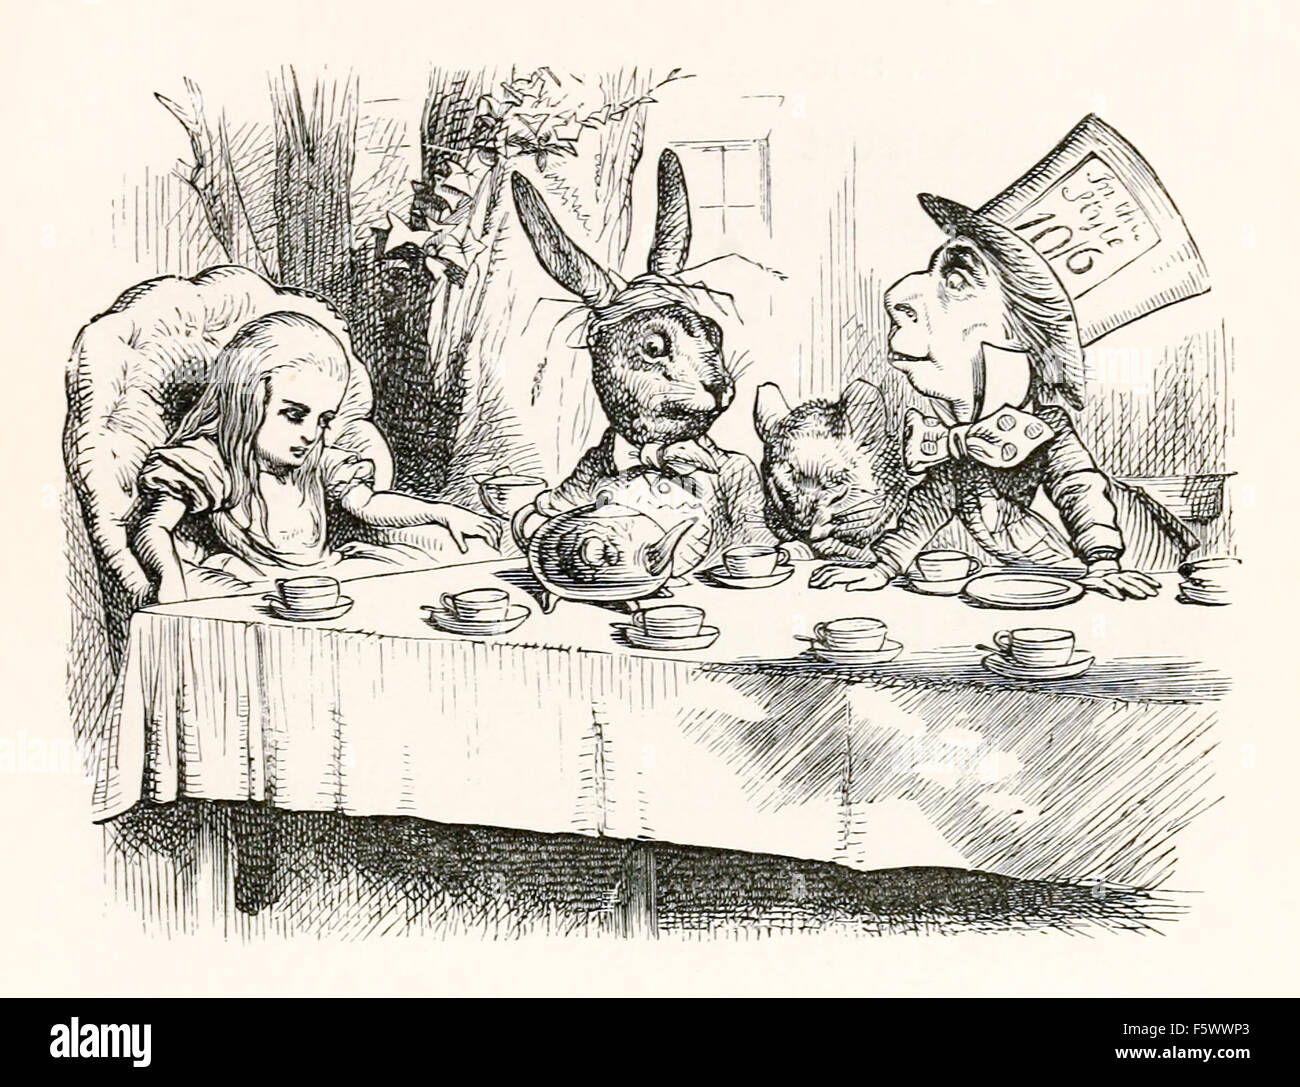 Mad Hatter's tea party, John Tenniel  (1820-1914) illustration from Lewis Carroll's 'Alice in Wonderland' published in 1865. Stock Photo